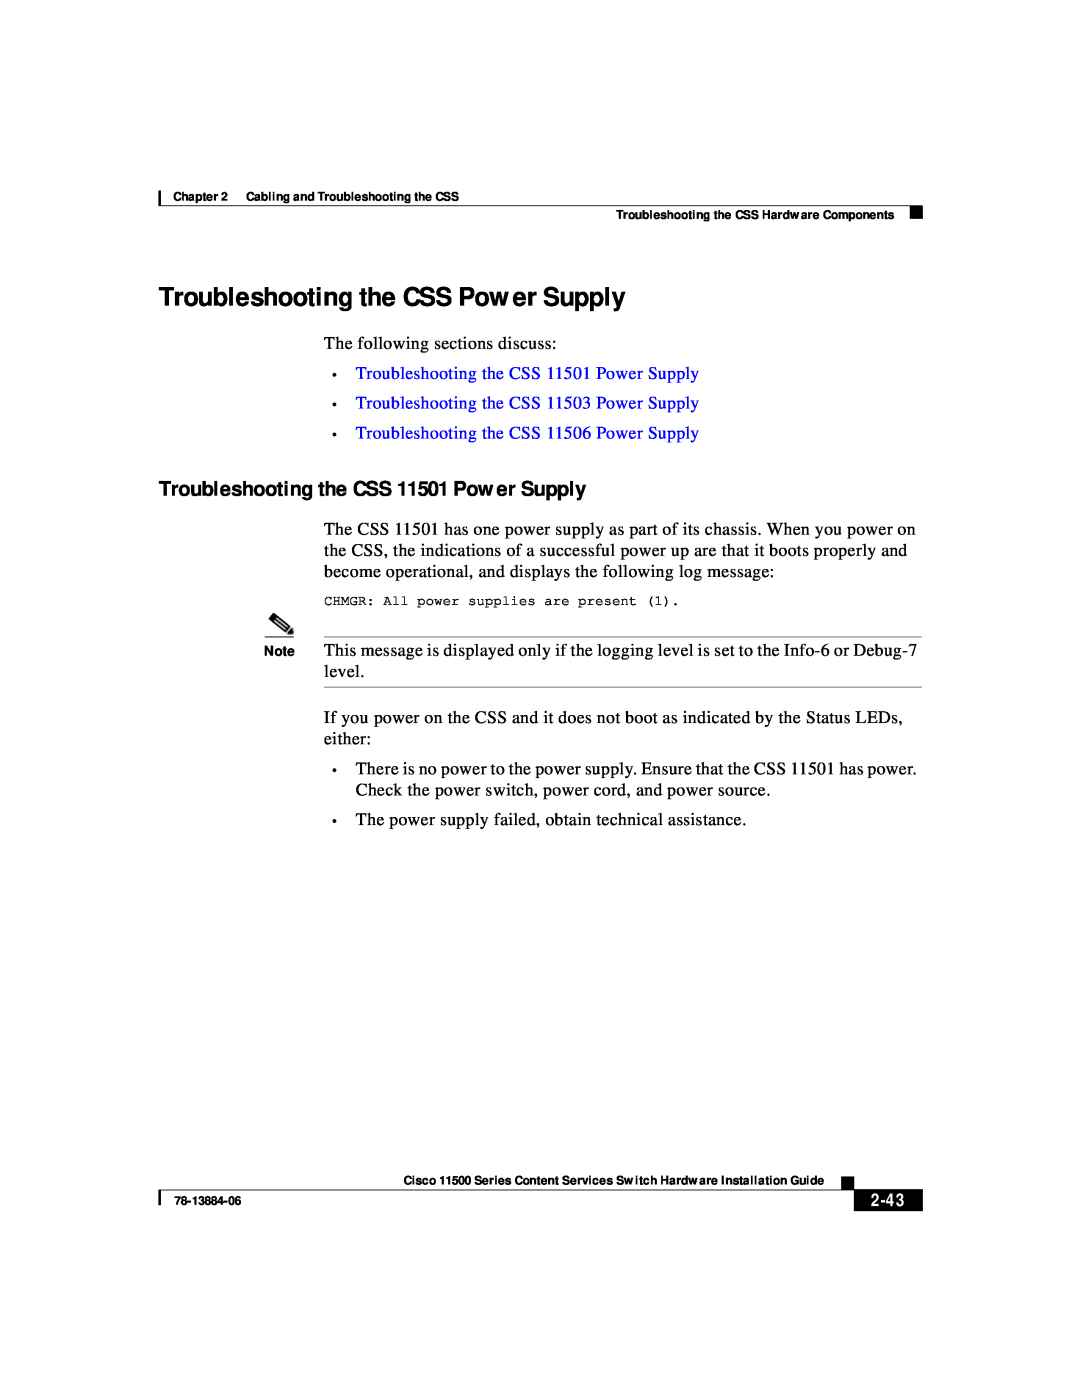 Cisco Systems 11500 Series manual Troubleshooting the CSS Power Supply, Troubleshooting the CSS 11501 Power Supply, 2-43 